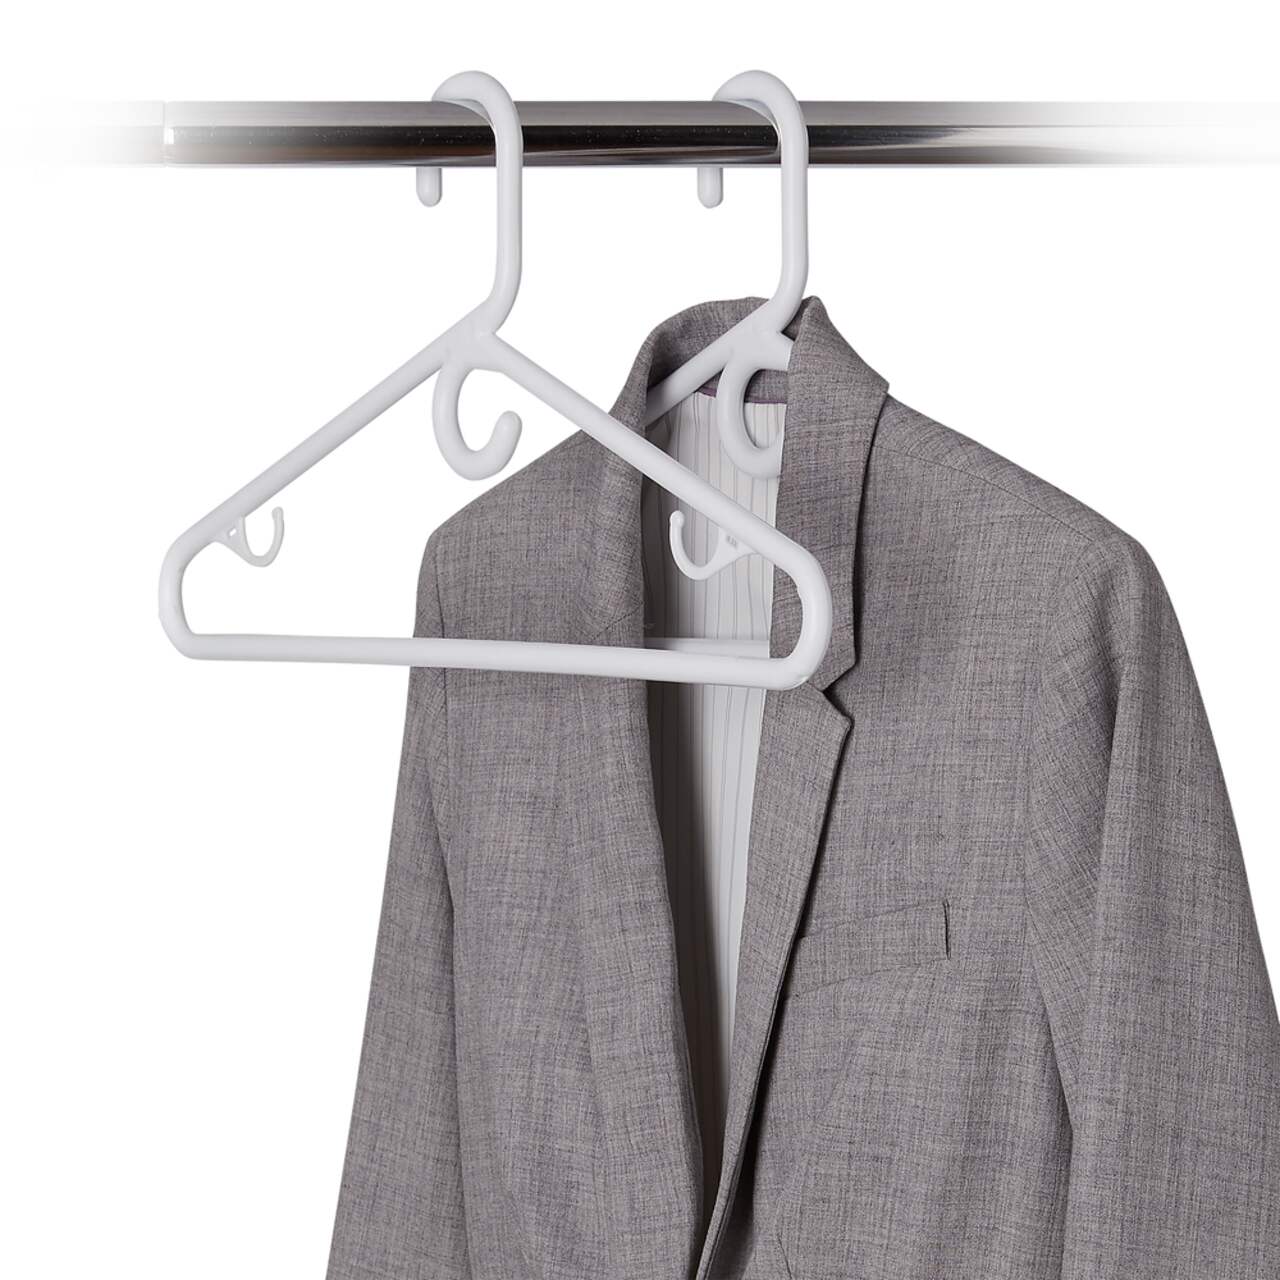 https://media-www.canadiantire.ca/product/living/home-organization/closet-organization/0687063/type-a-12-pack-heavy-duty-plastic-hanger-d9441b8e-566b-454e-b794-b2ee613ff1e0.png?imdensity=1&imwidth=1244&impolicy=mZoom